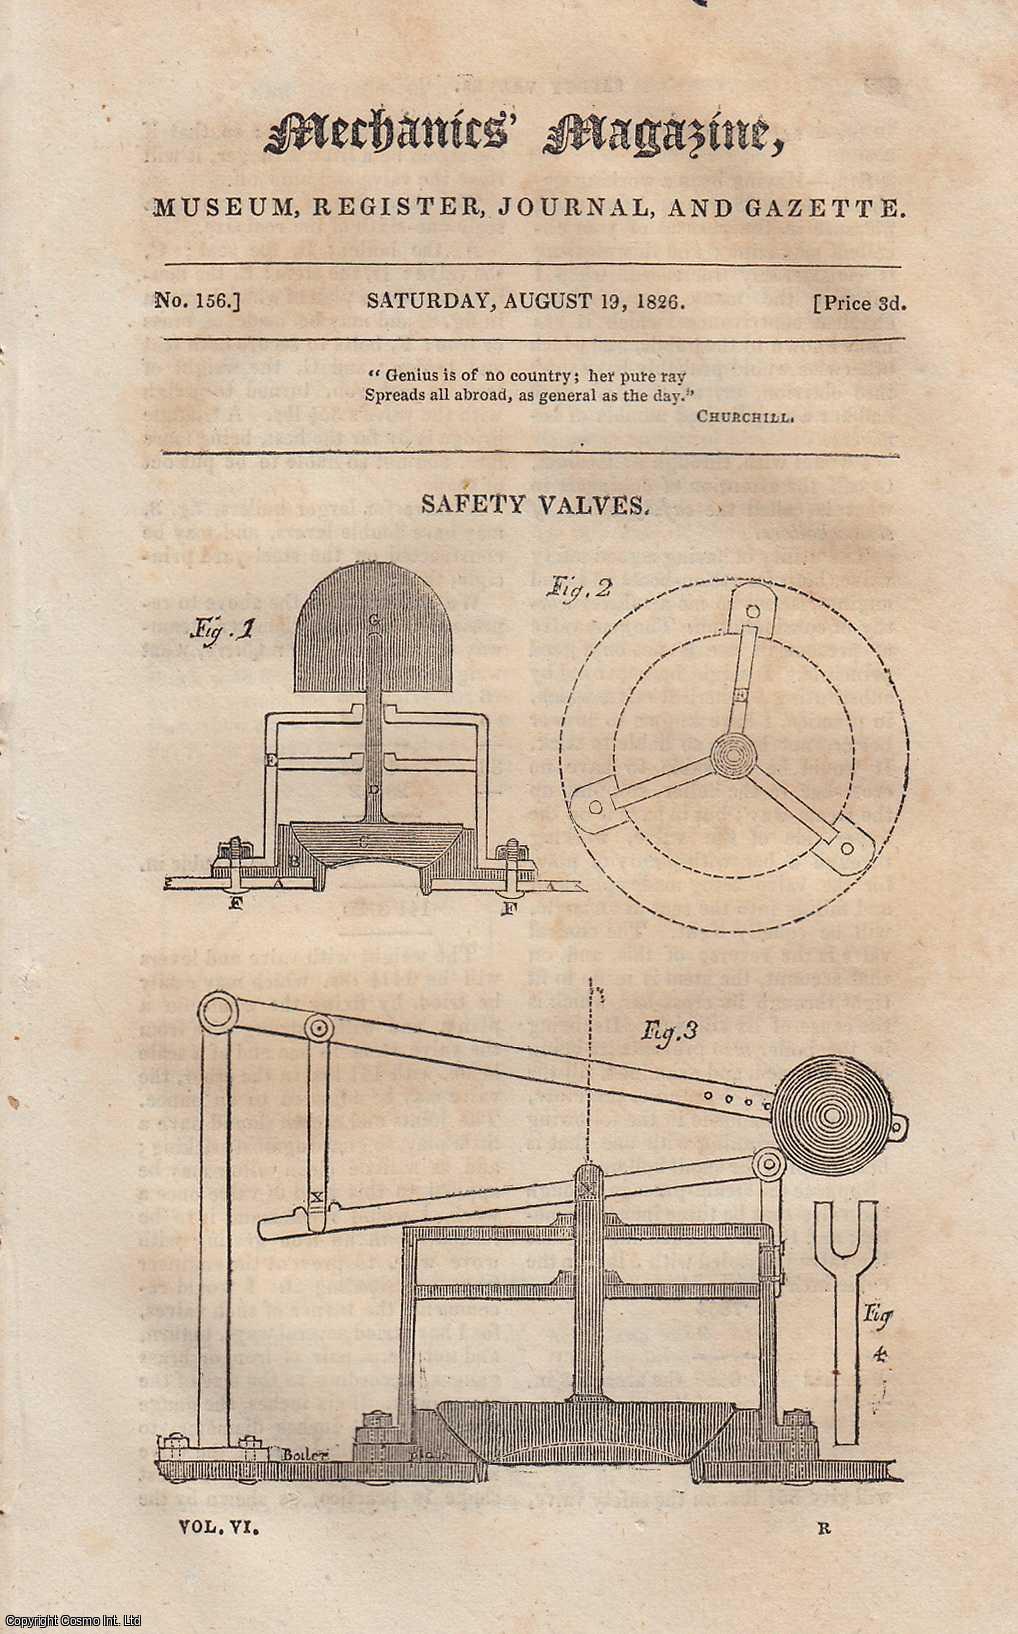 Mechanics Magazine - Improved Mode of Casting Cylinders; History and Prospects of English Industry; Mercurial Vacuum Engine; On The Preservation of The Copper Sheathing of Ships, etc. Mechanics Magazine, Museum, Register, Journal and Gazette. Issue No. 154. A complete rare weekly issue of the Mechanics' Magazine, 1826.